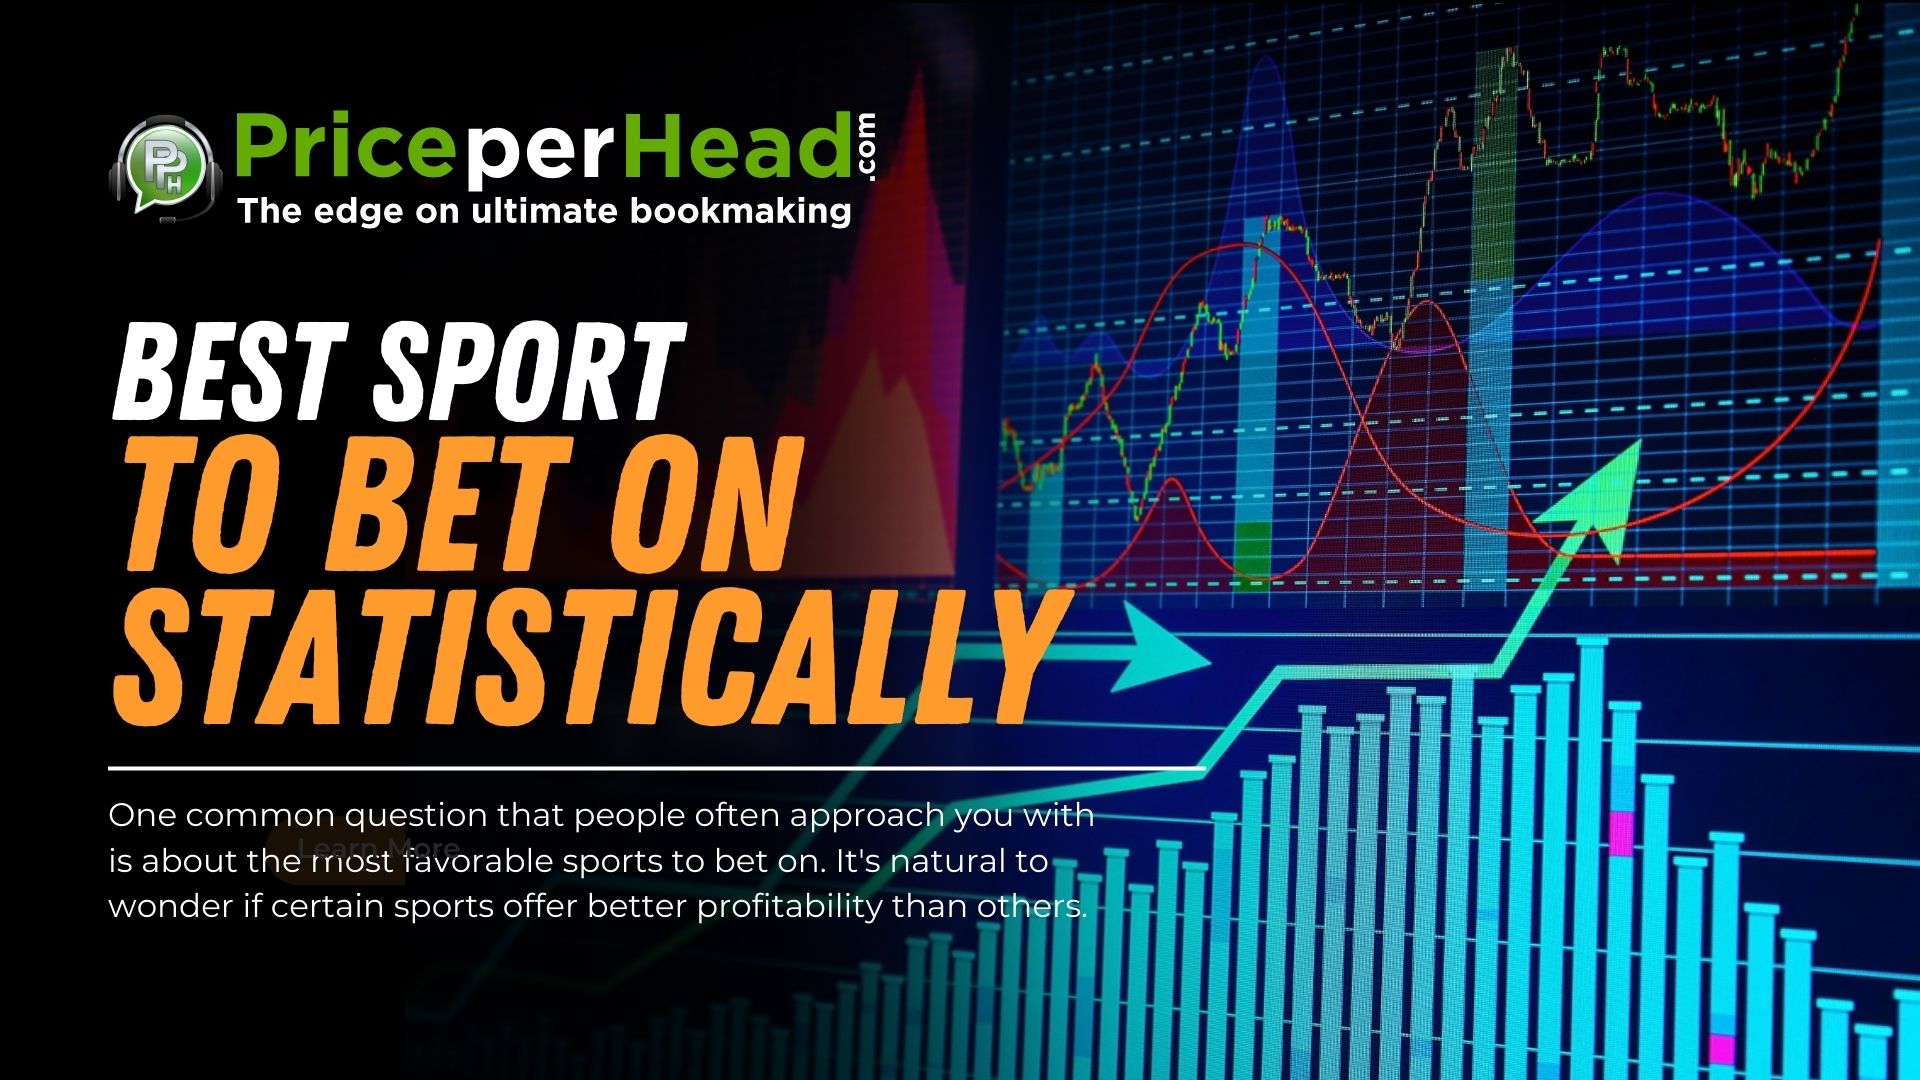 best sports to bet on statistically, pay per head services, price per head